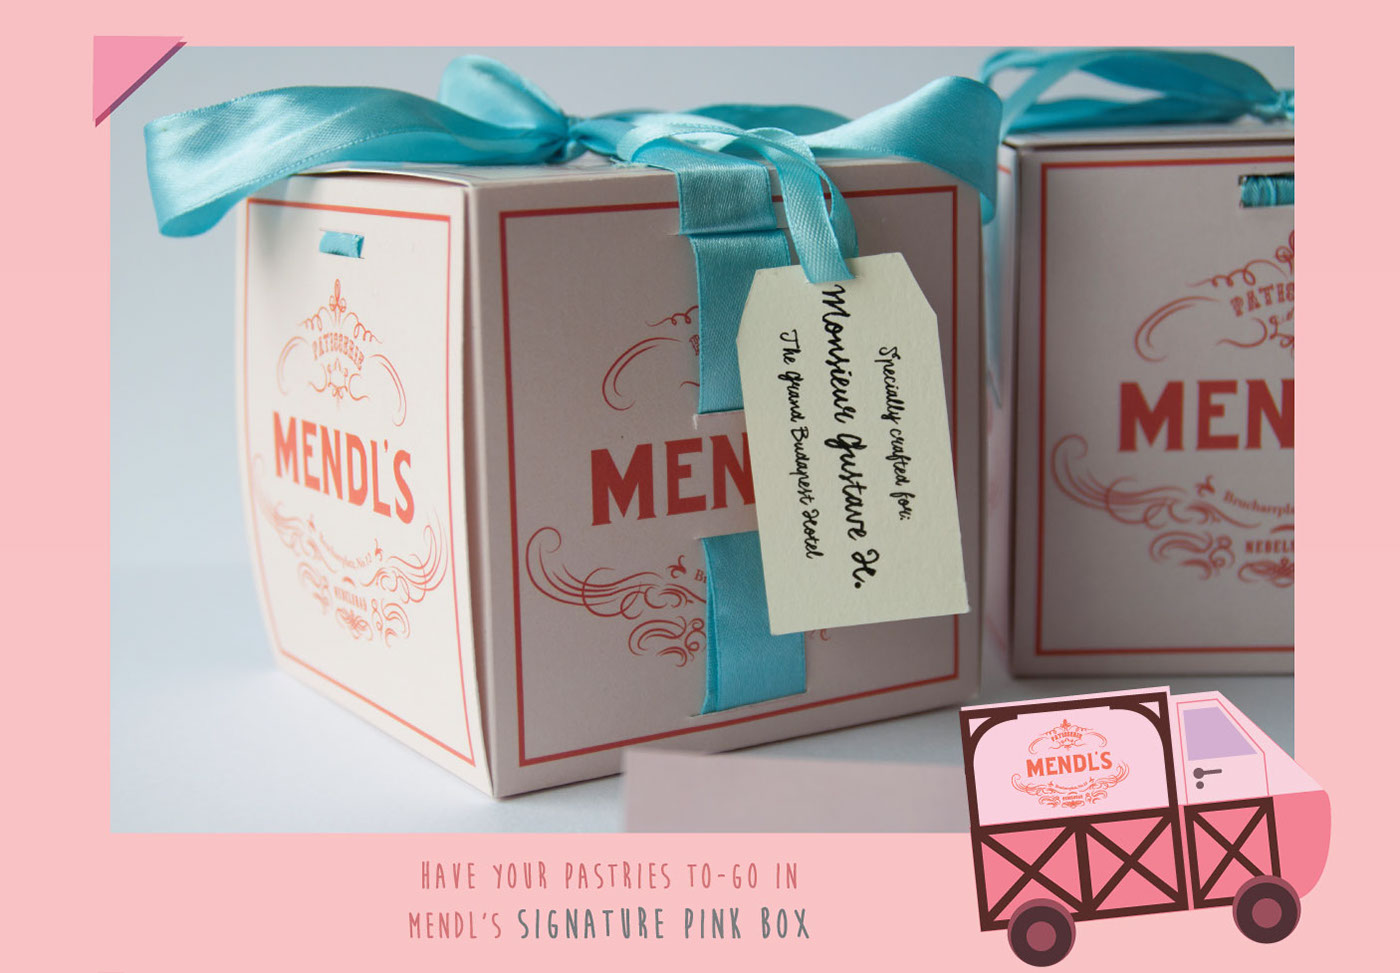 mendl's patisserie wes anderson centerpiece design grand budapest hotel Movies cake shop pastry packaging pastry shop Pink Theme props